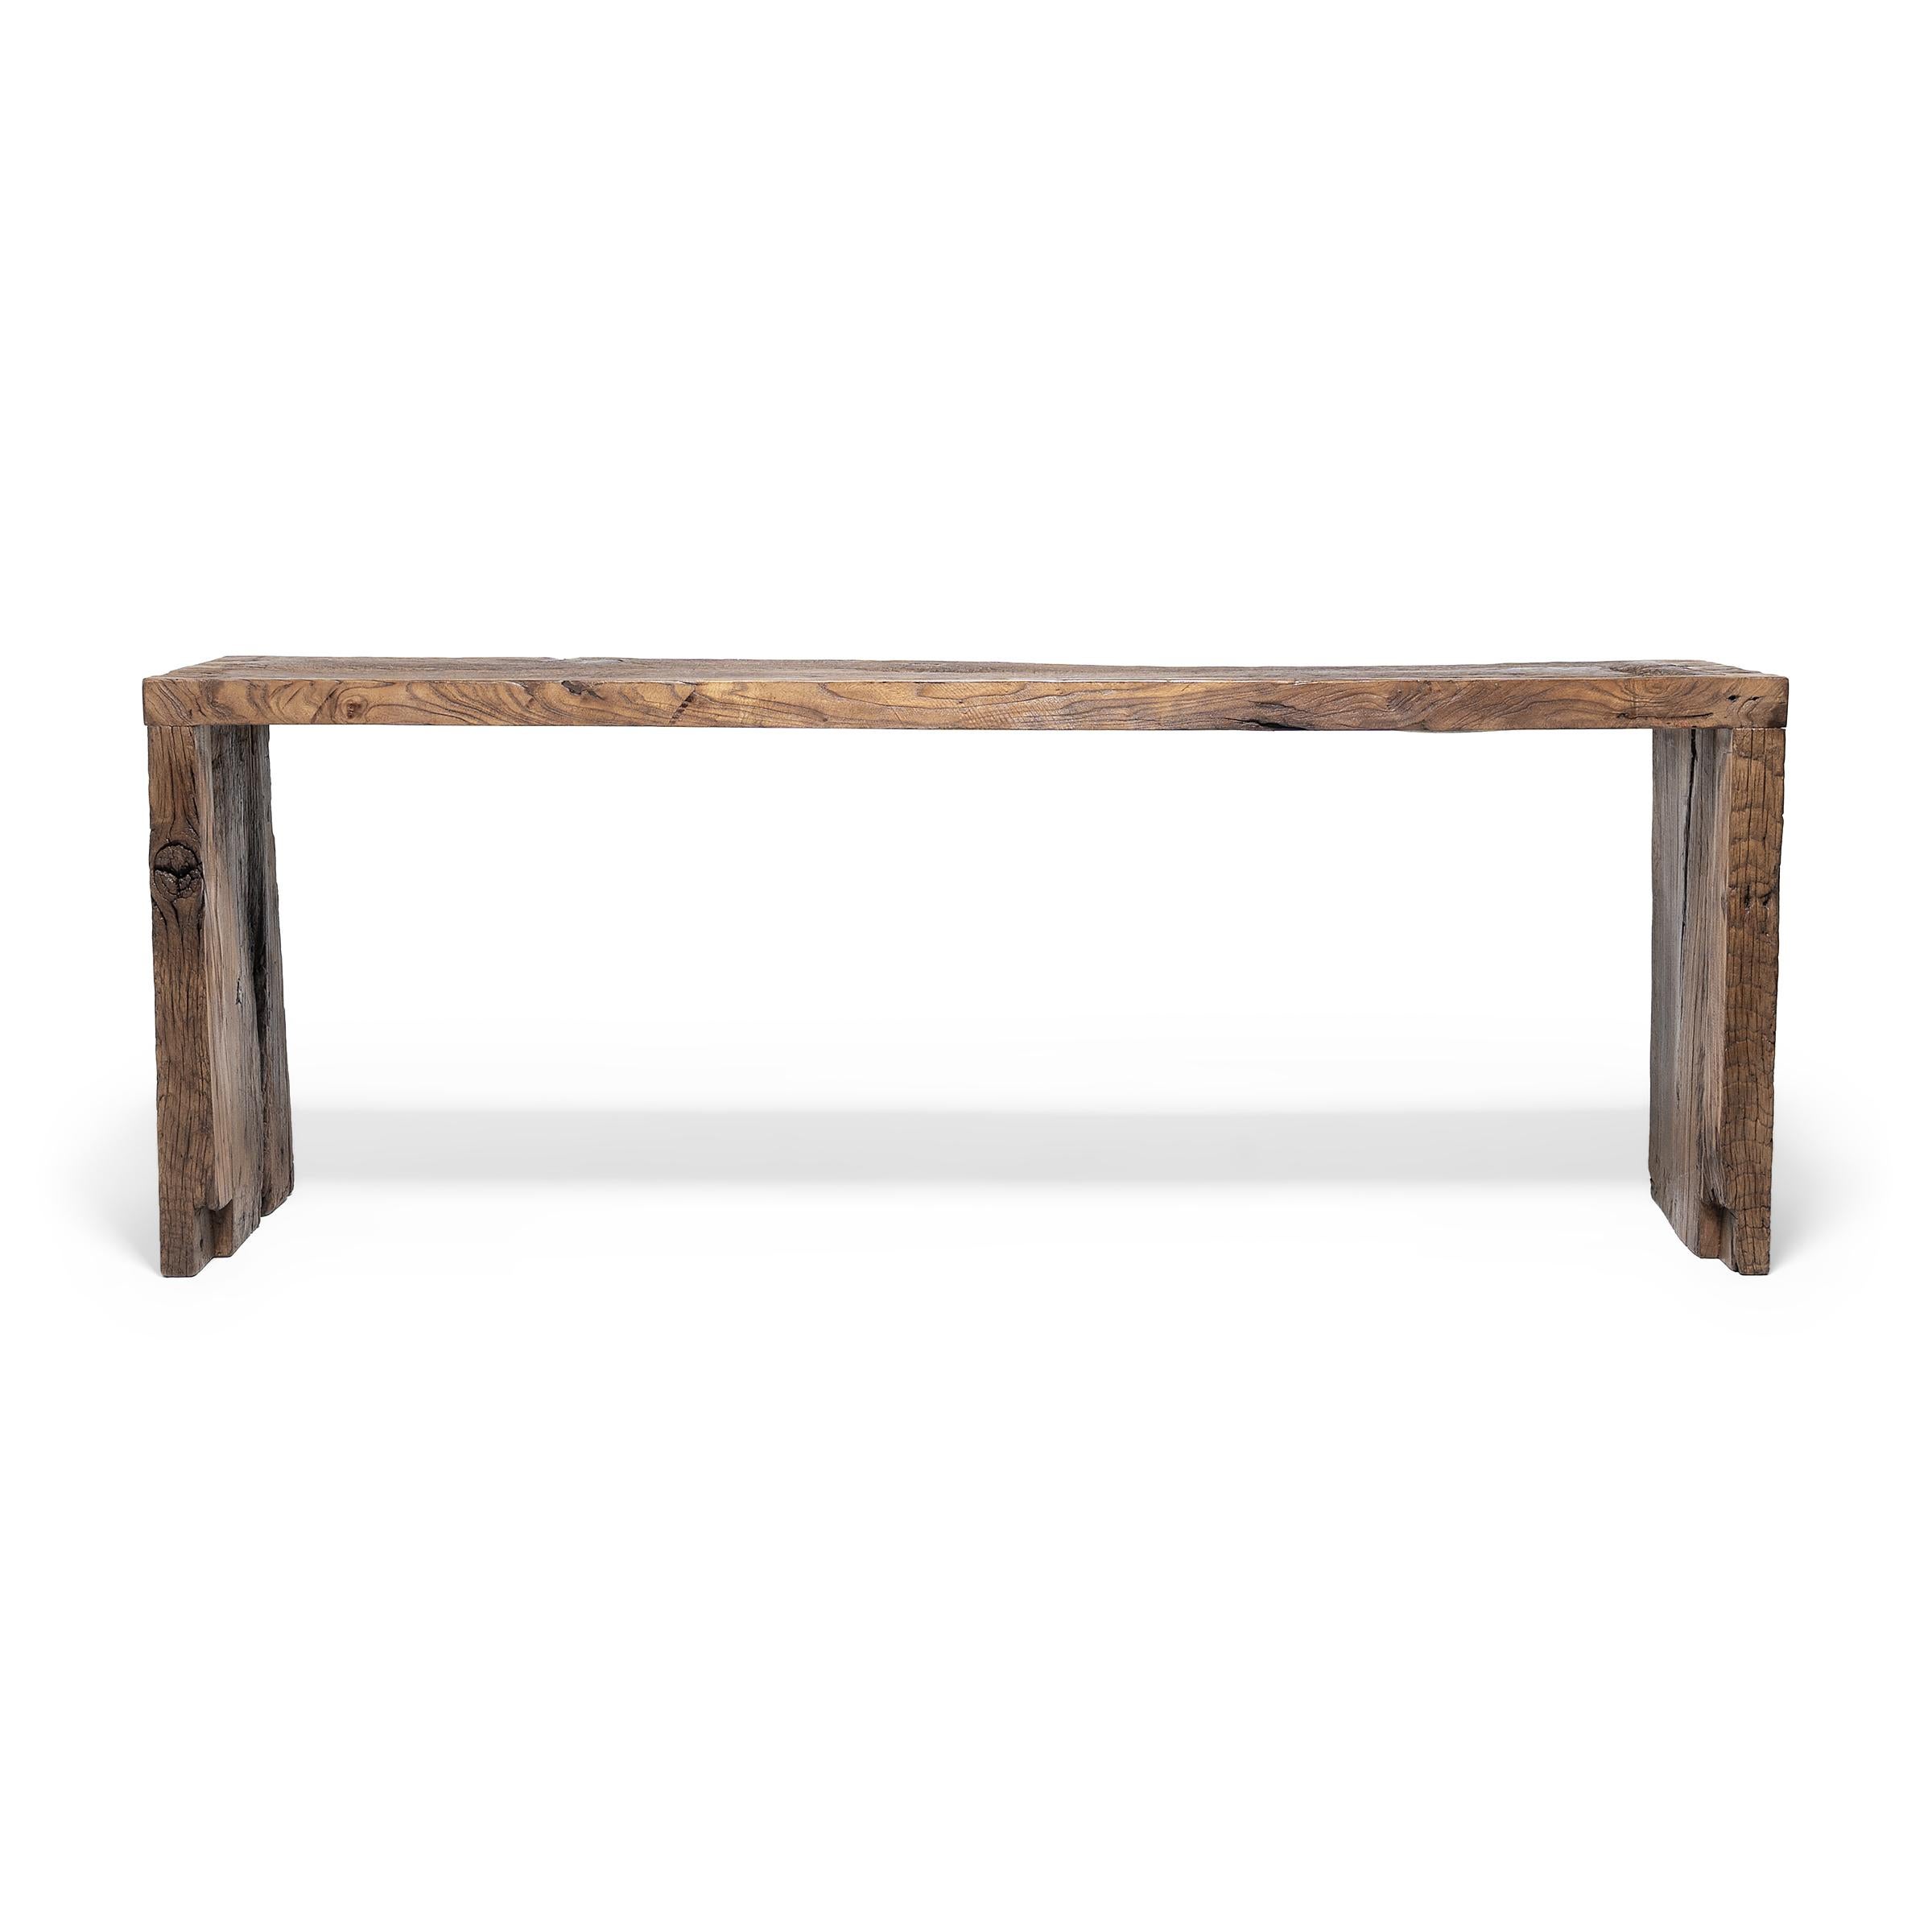 Made of wood reclaimed from 18th-century Chinese buildings, this contemporary altar table honors the materials with clean lines and minimal ornamentation. Embracing the notion of “wabi-sabi,” the table charms with its irregular surface, mottled